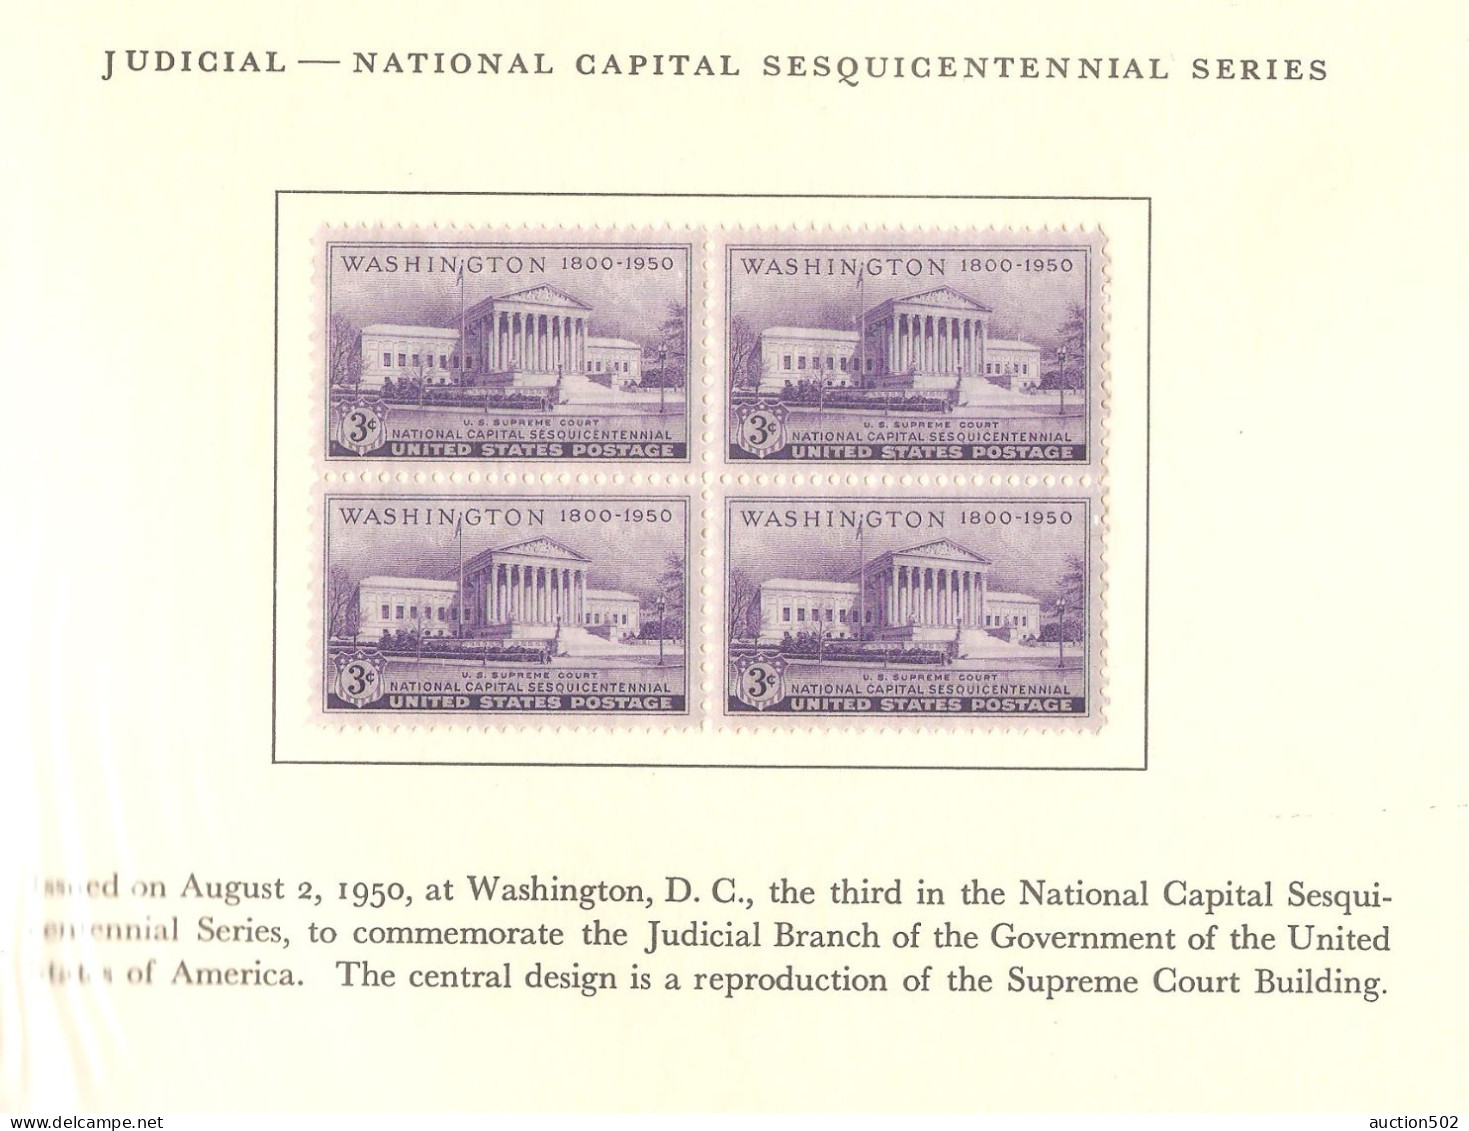 USA special book 13th Congress of the U.P.U. Brussels Belgium MAY 1952 the 1th 2 stamps are hinged, the other 2 perfect